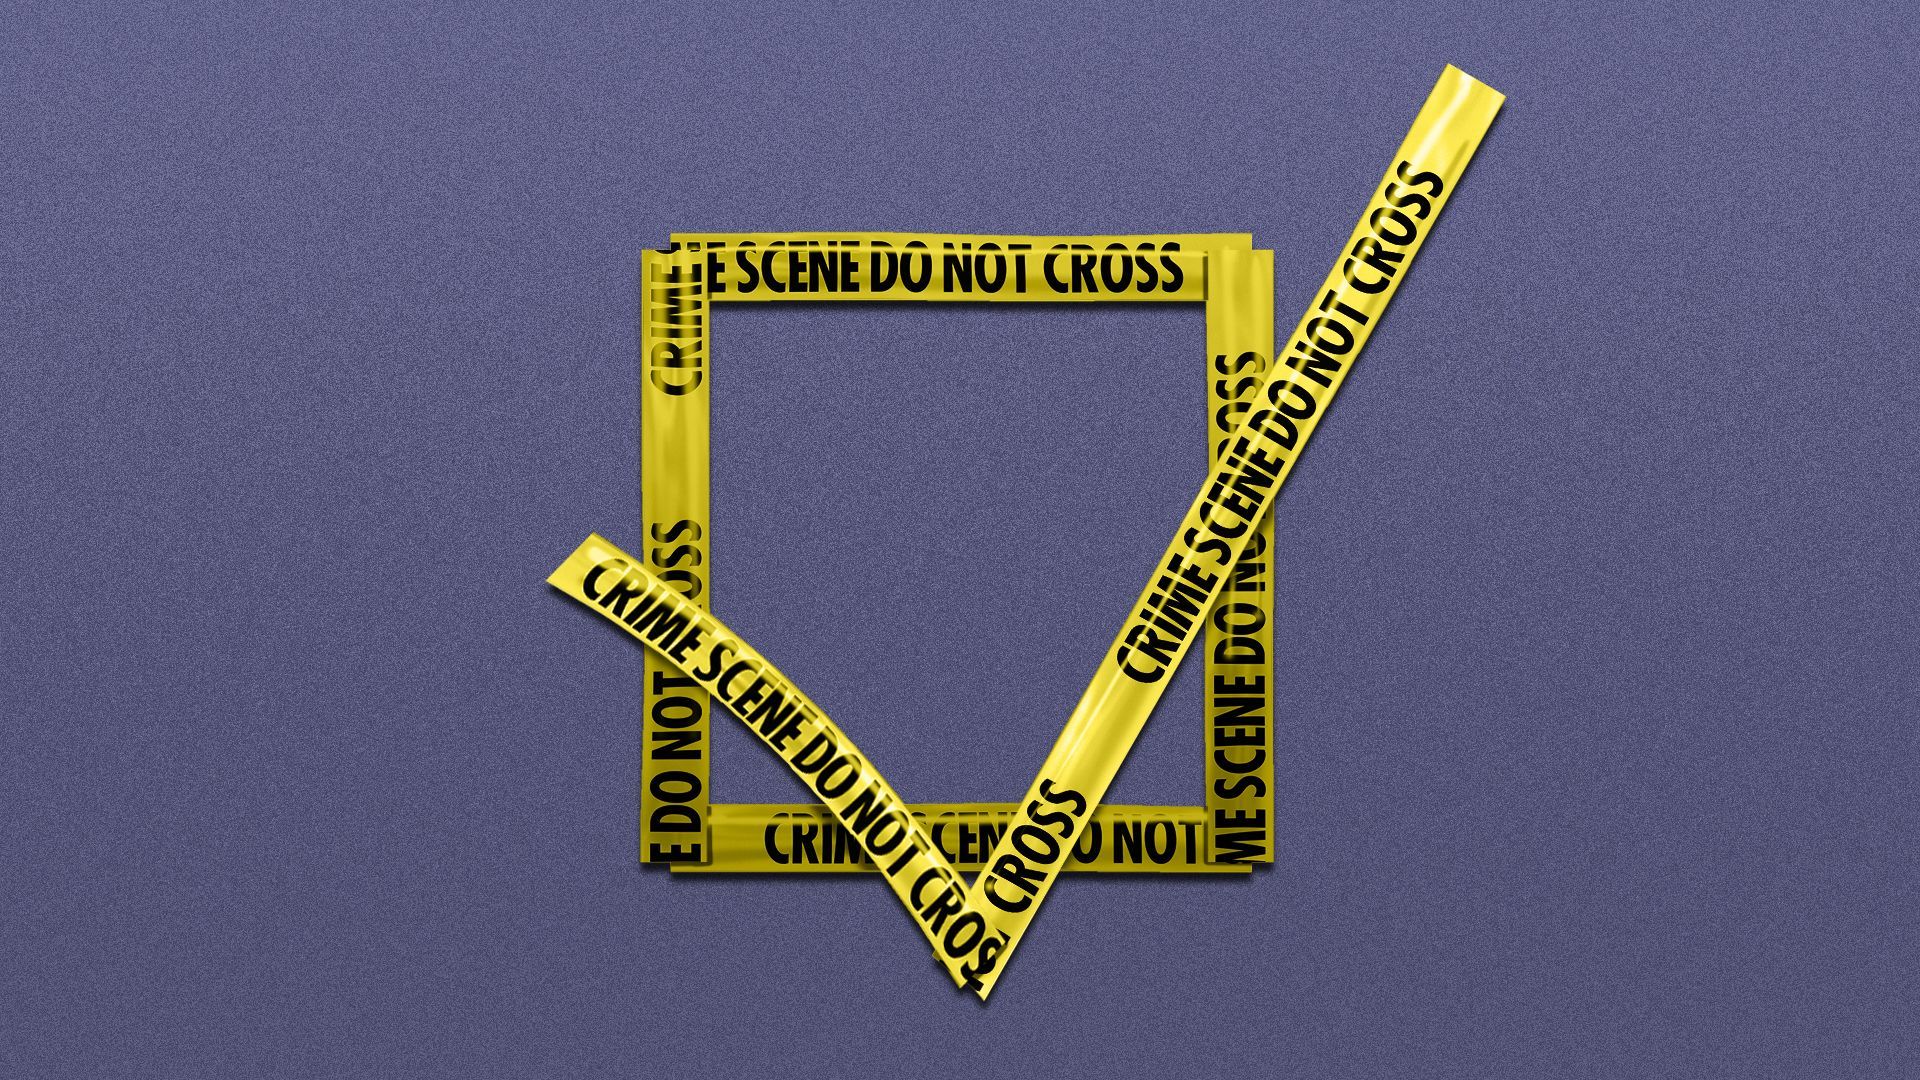 Illustration of a checkmark made out of crime scene tape.